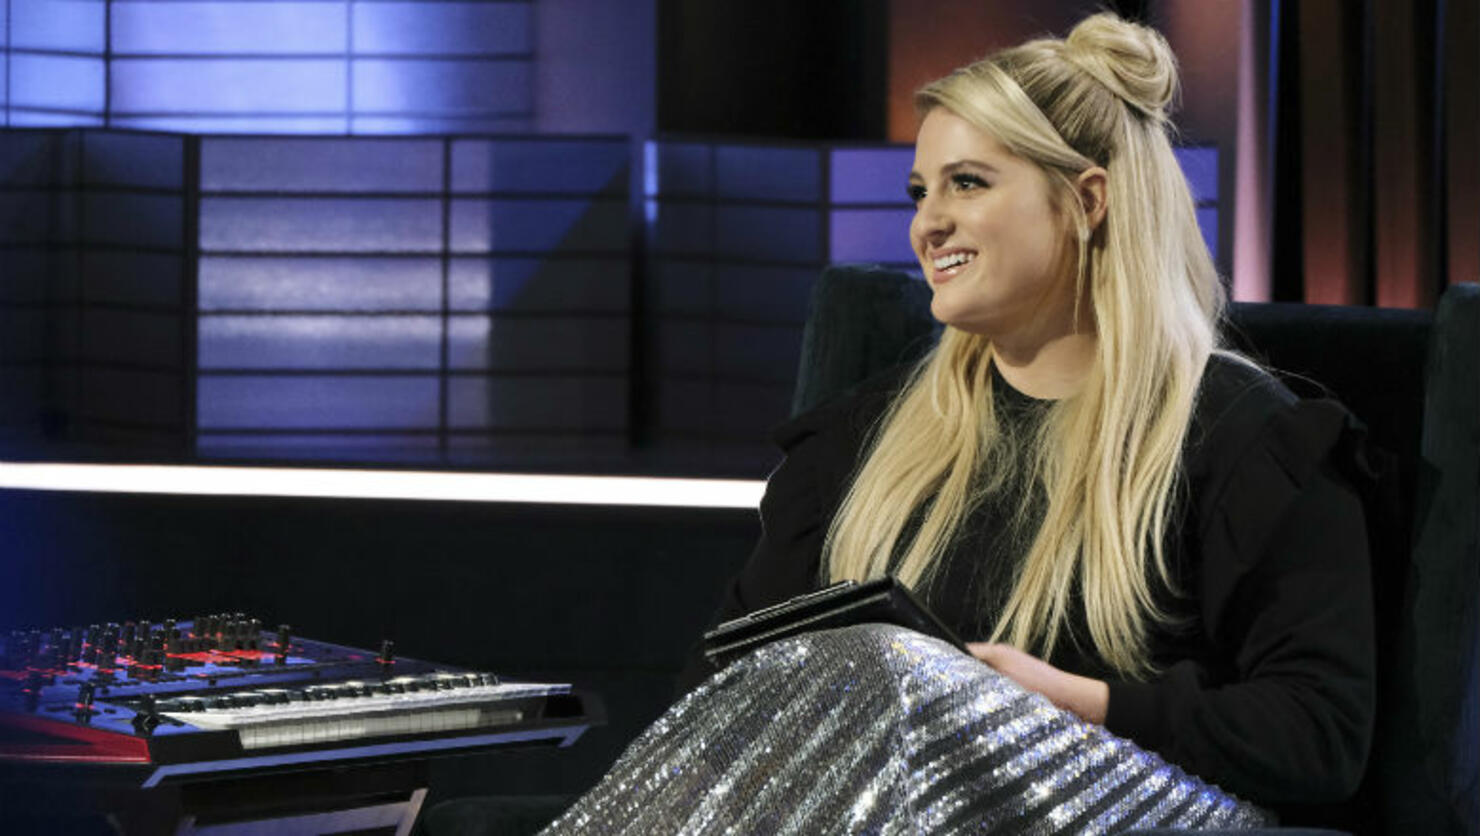 Join us for an Audacy Check In with Meghan Trainor